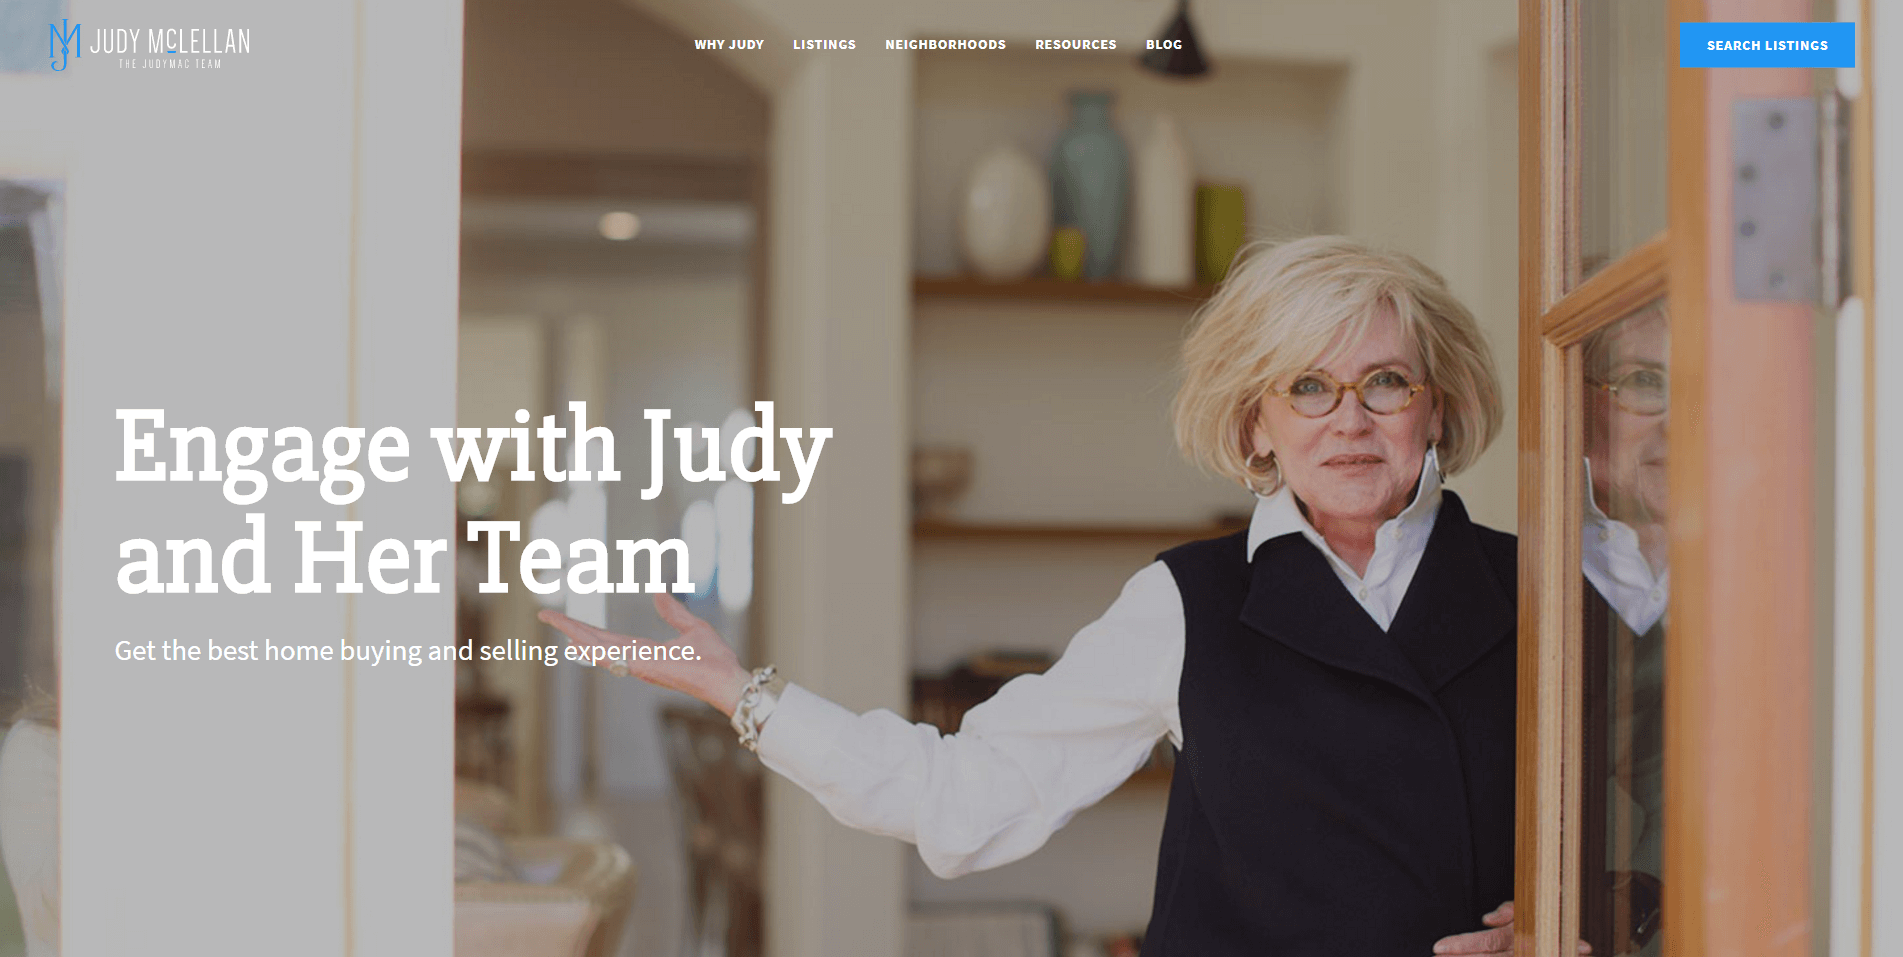  Check this out!  Here are 101 of the best real estate websites.  We reviewed each site and ranked them 1-101.  Here's judymac.com.  Curious who made the cut? 